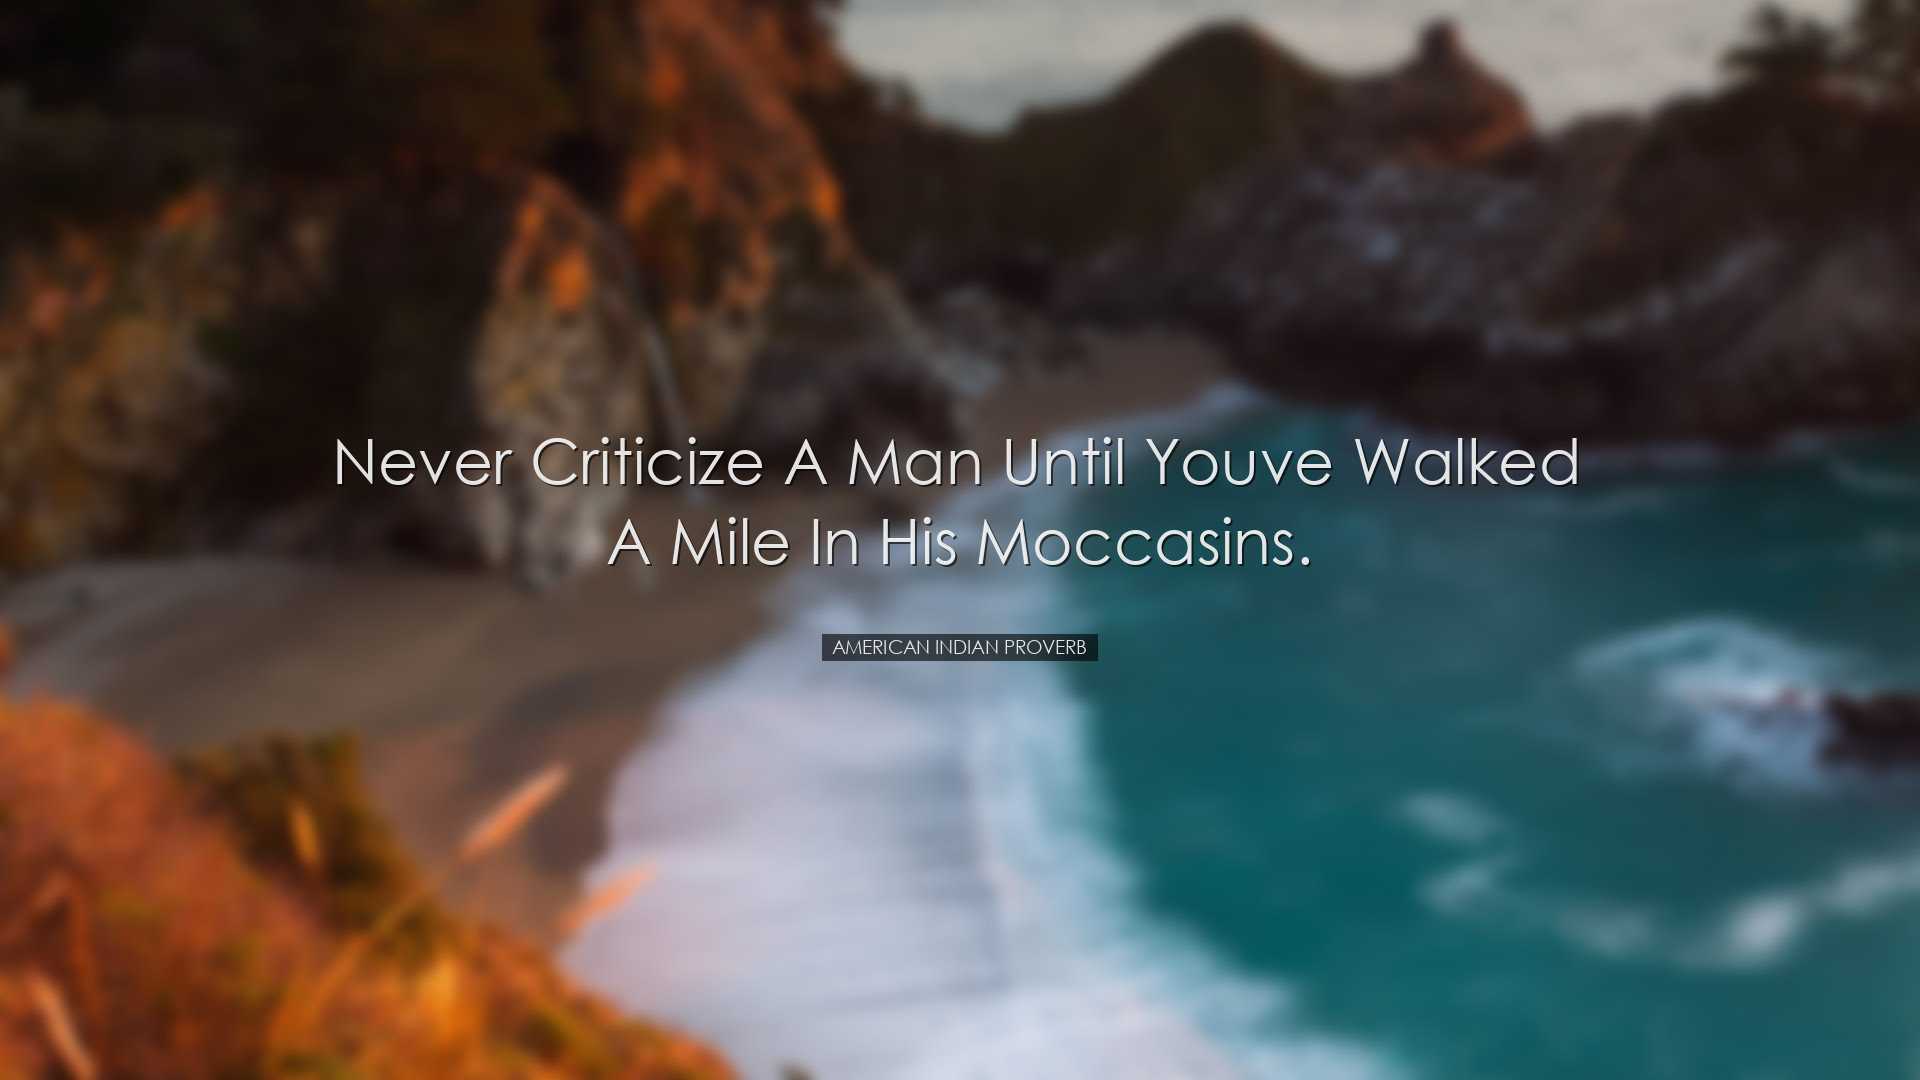 Never criticize a man until youve walked a mile in his moccasins.